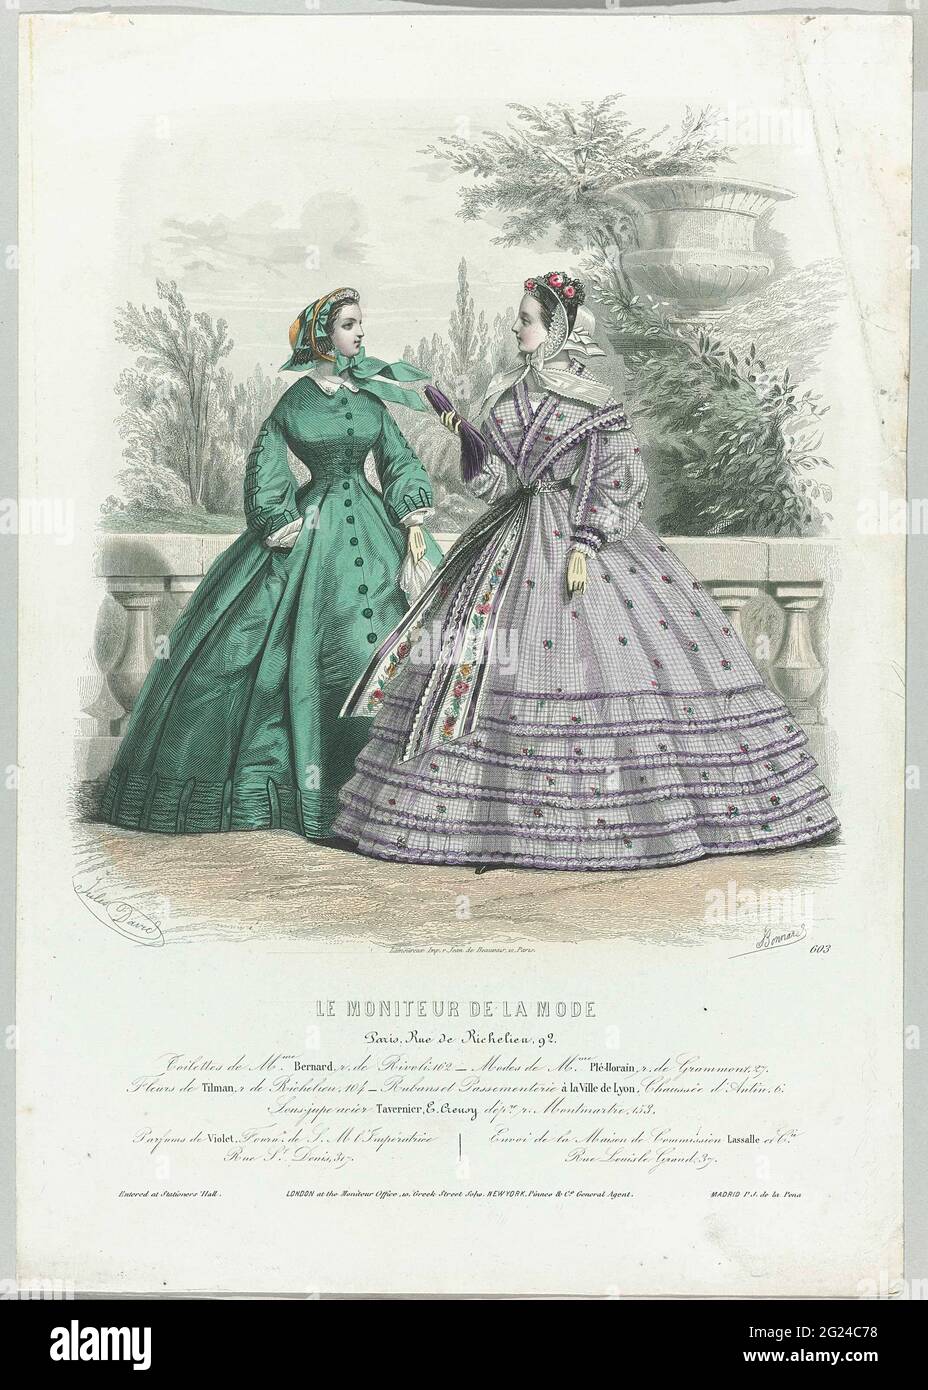 An Explosion of Fashion Magazines. Starting from the 1850s, fashion  magazines became more affordable and acquired a wider readership. The  invention of the sewing machine around 1850 made it easier for people